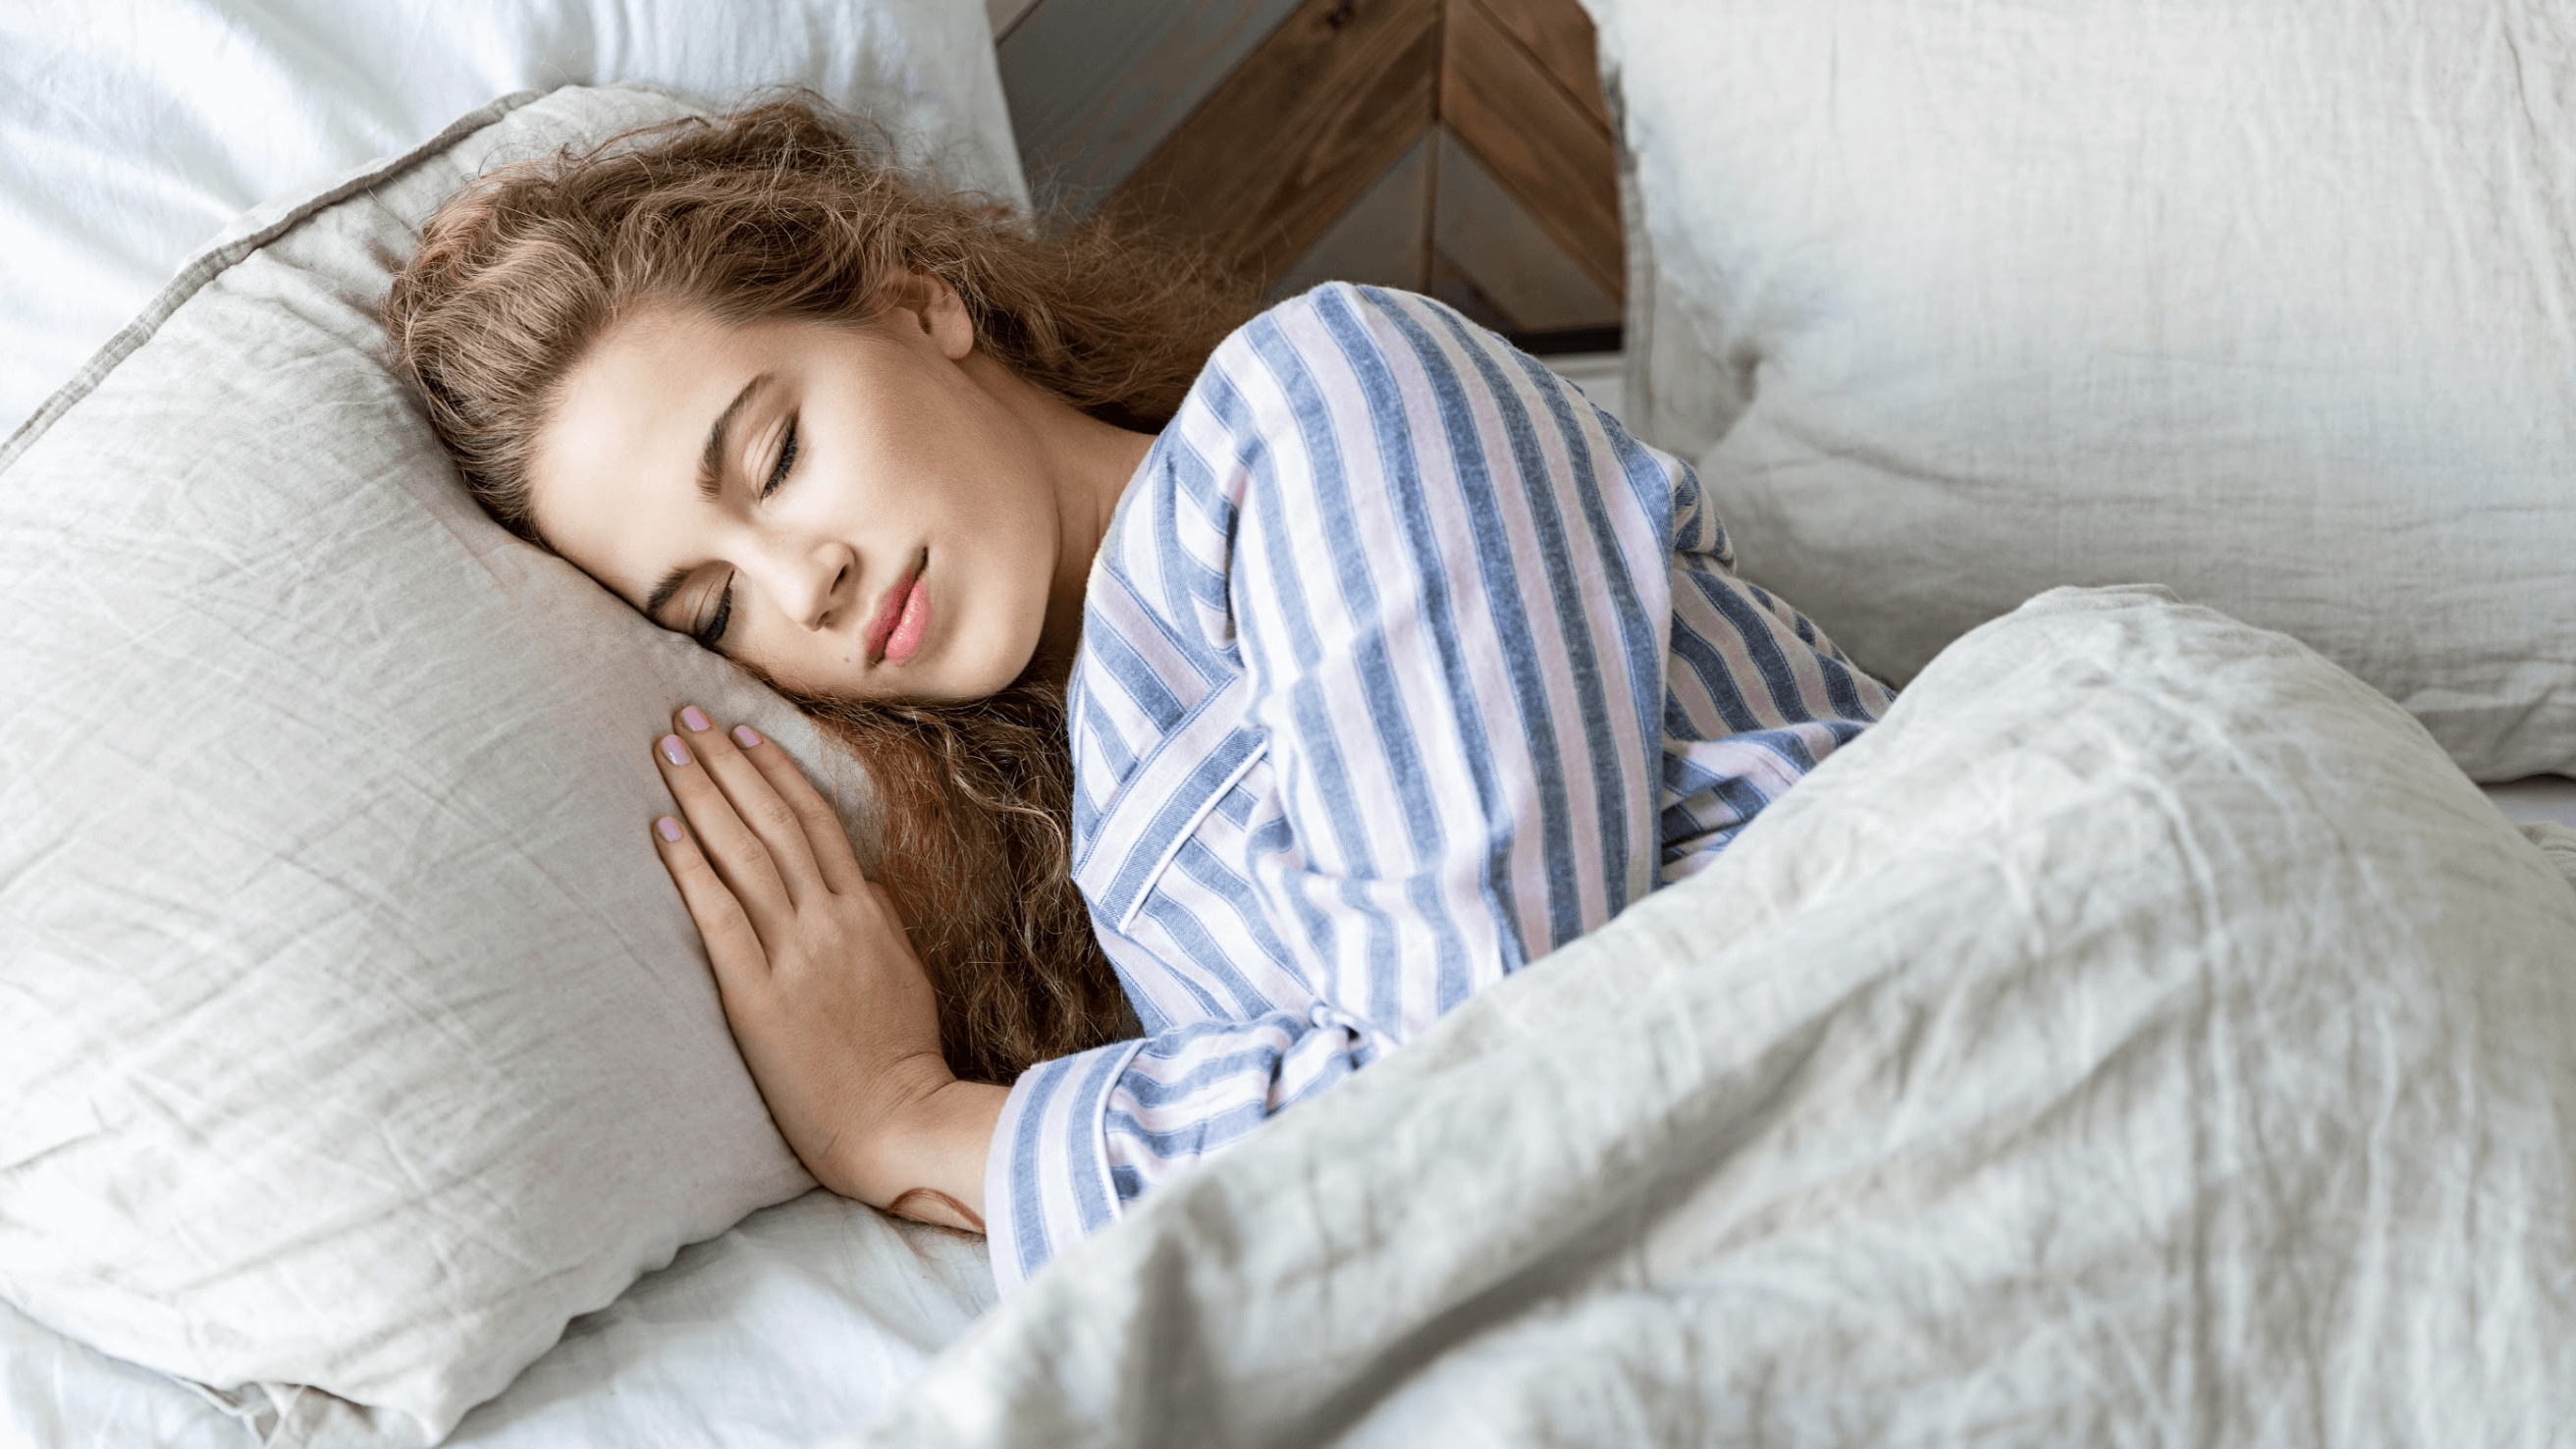 How to Sleep with SI Joint Pain: 12 Best Ways